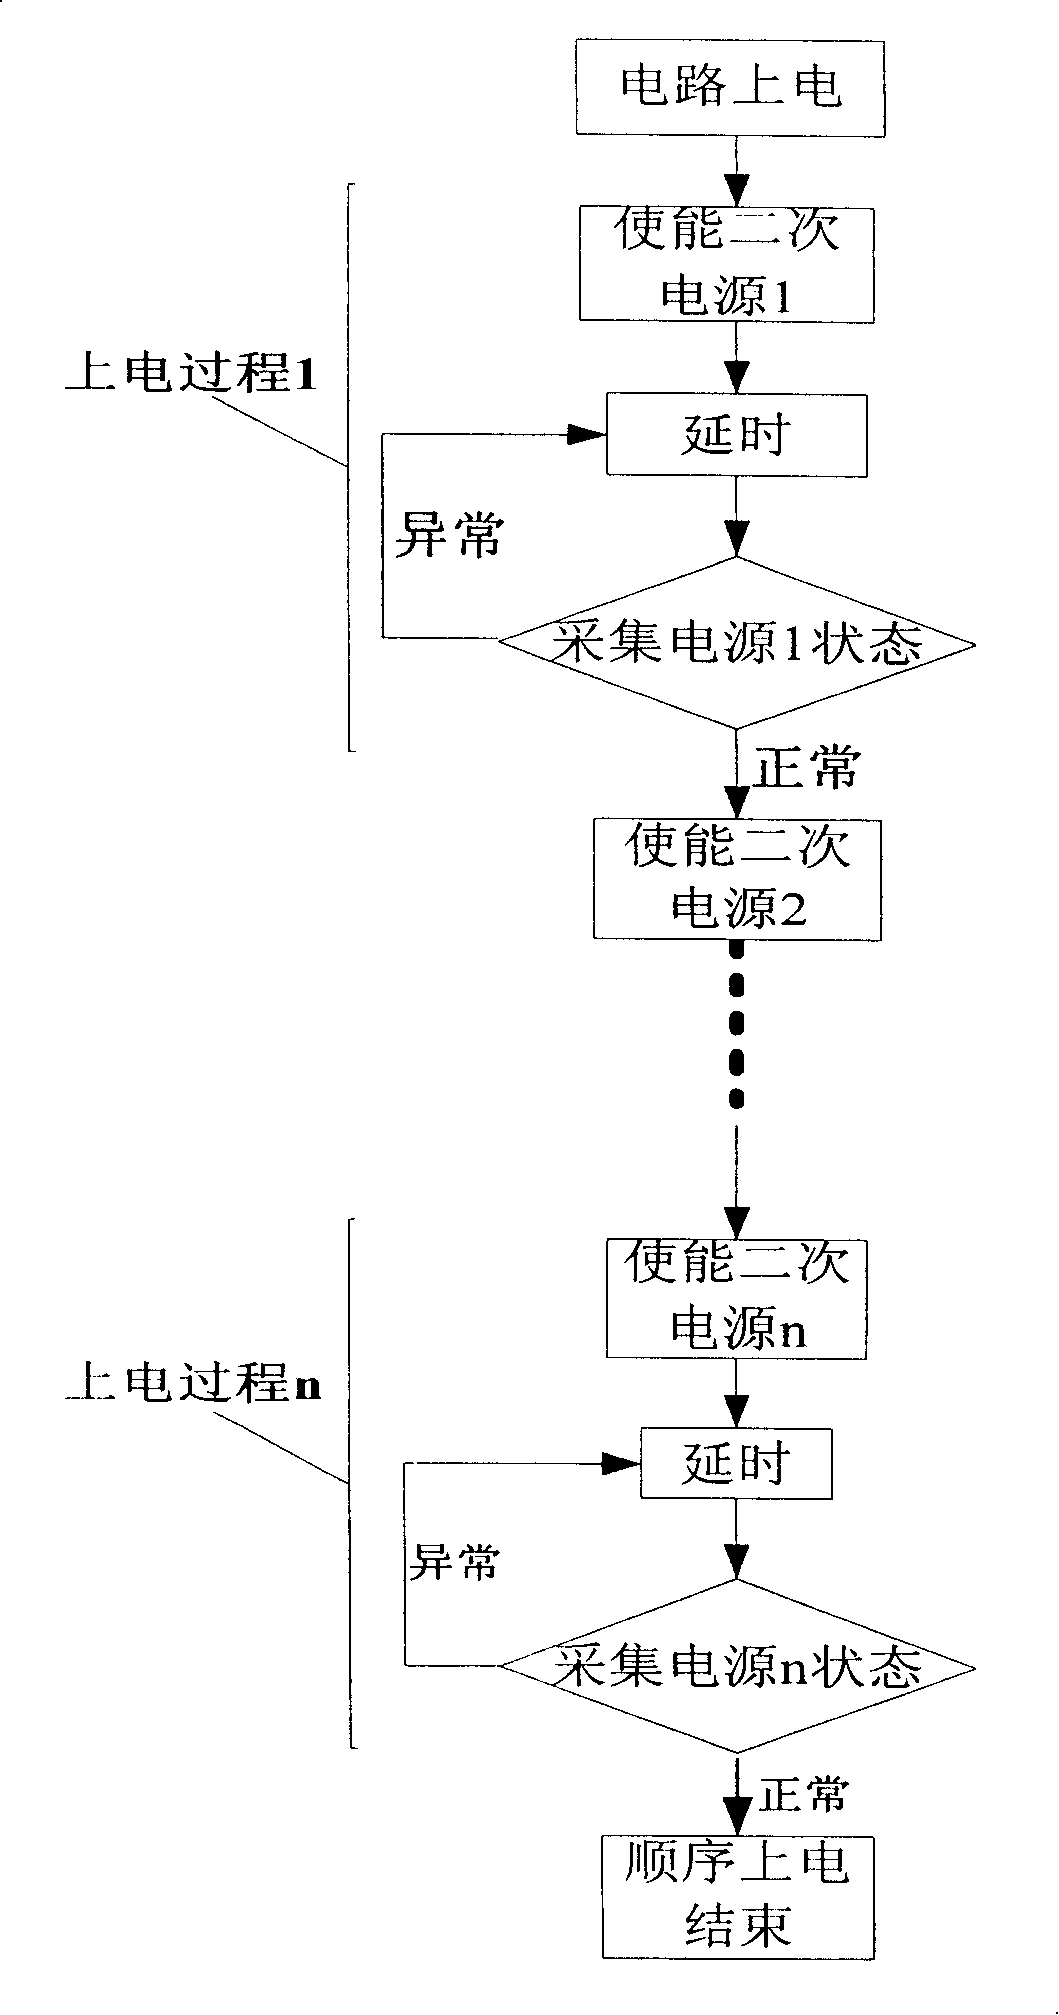 Implementation device and method for multi-voltage monitoring and protection